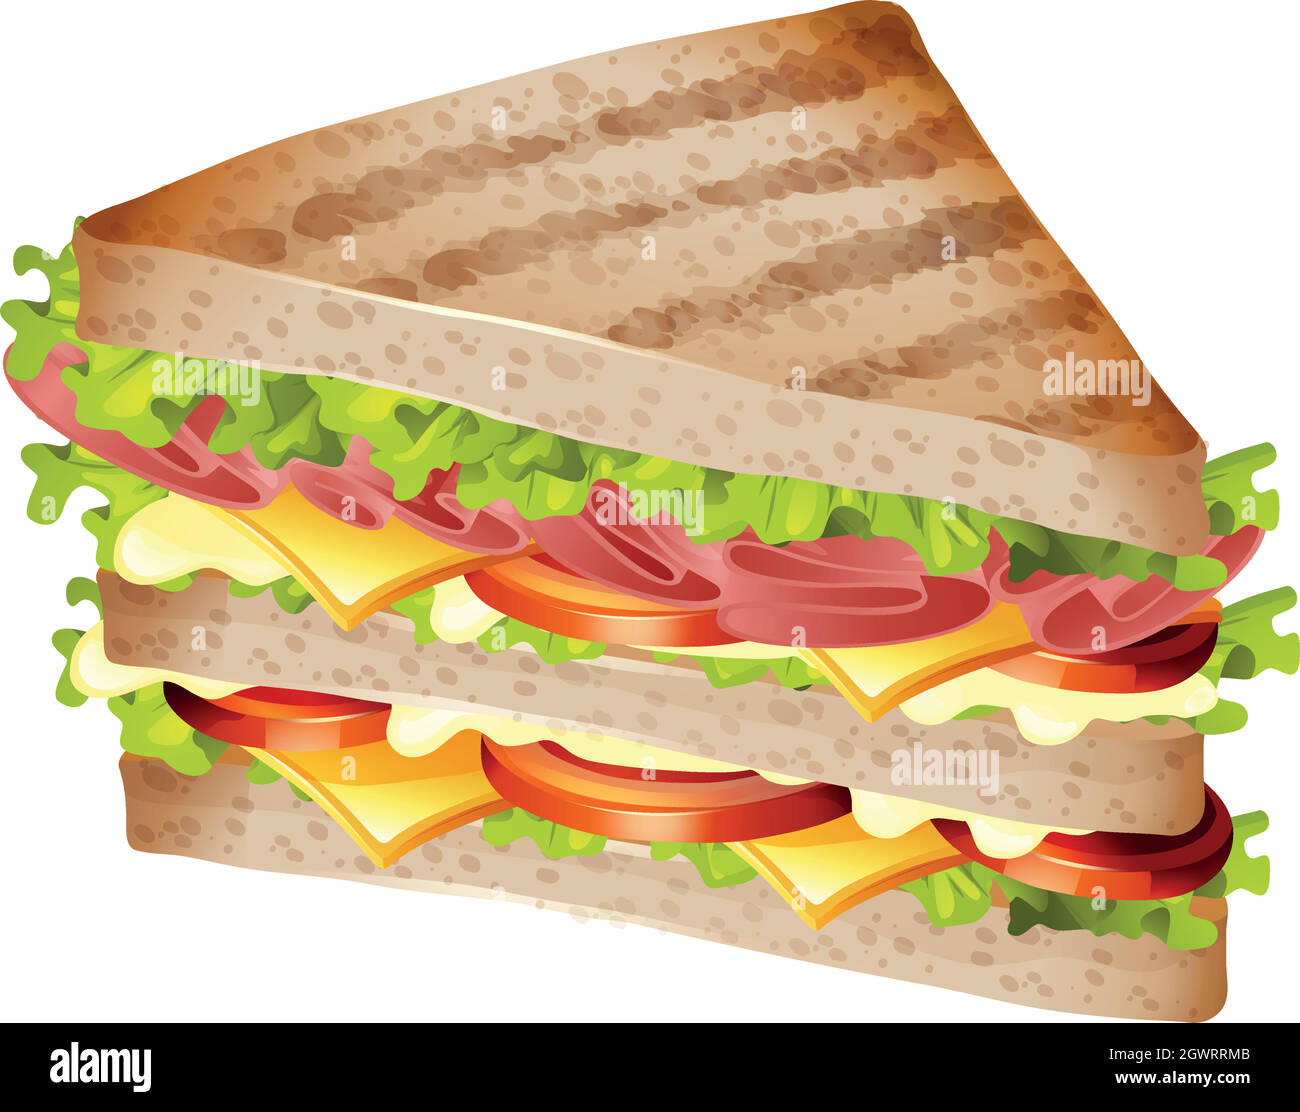 Sandwich with ham and cheese Stock Vector